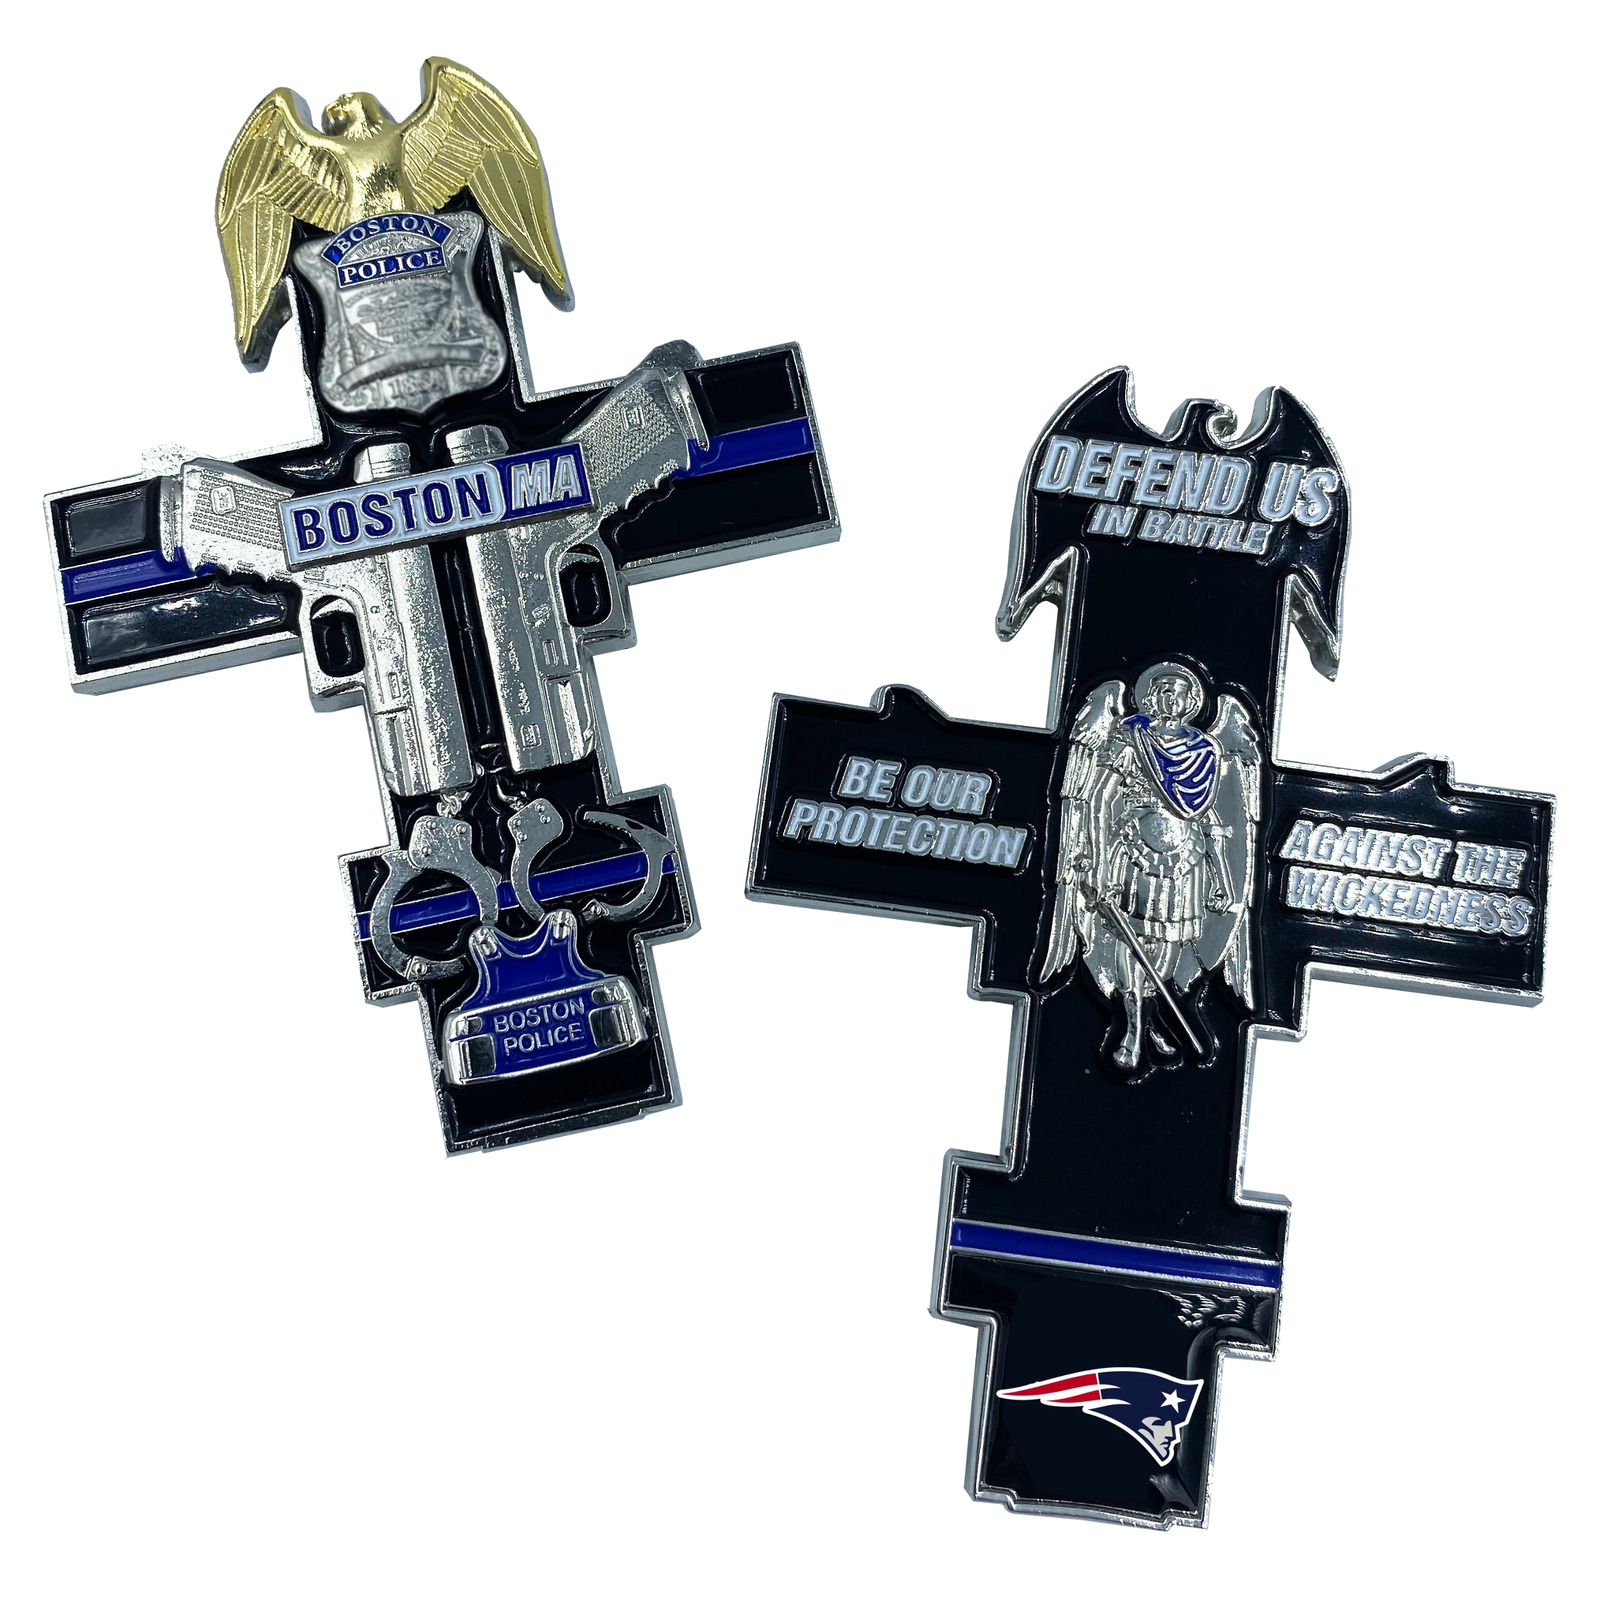 FF-002 New England Patriots inspired Boston Police Thin Blue Line St. Michael Cr